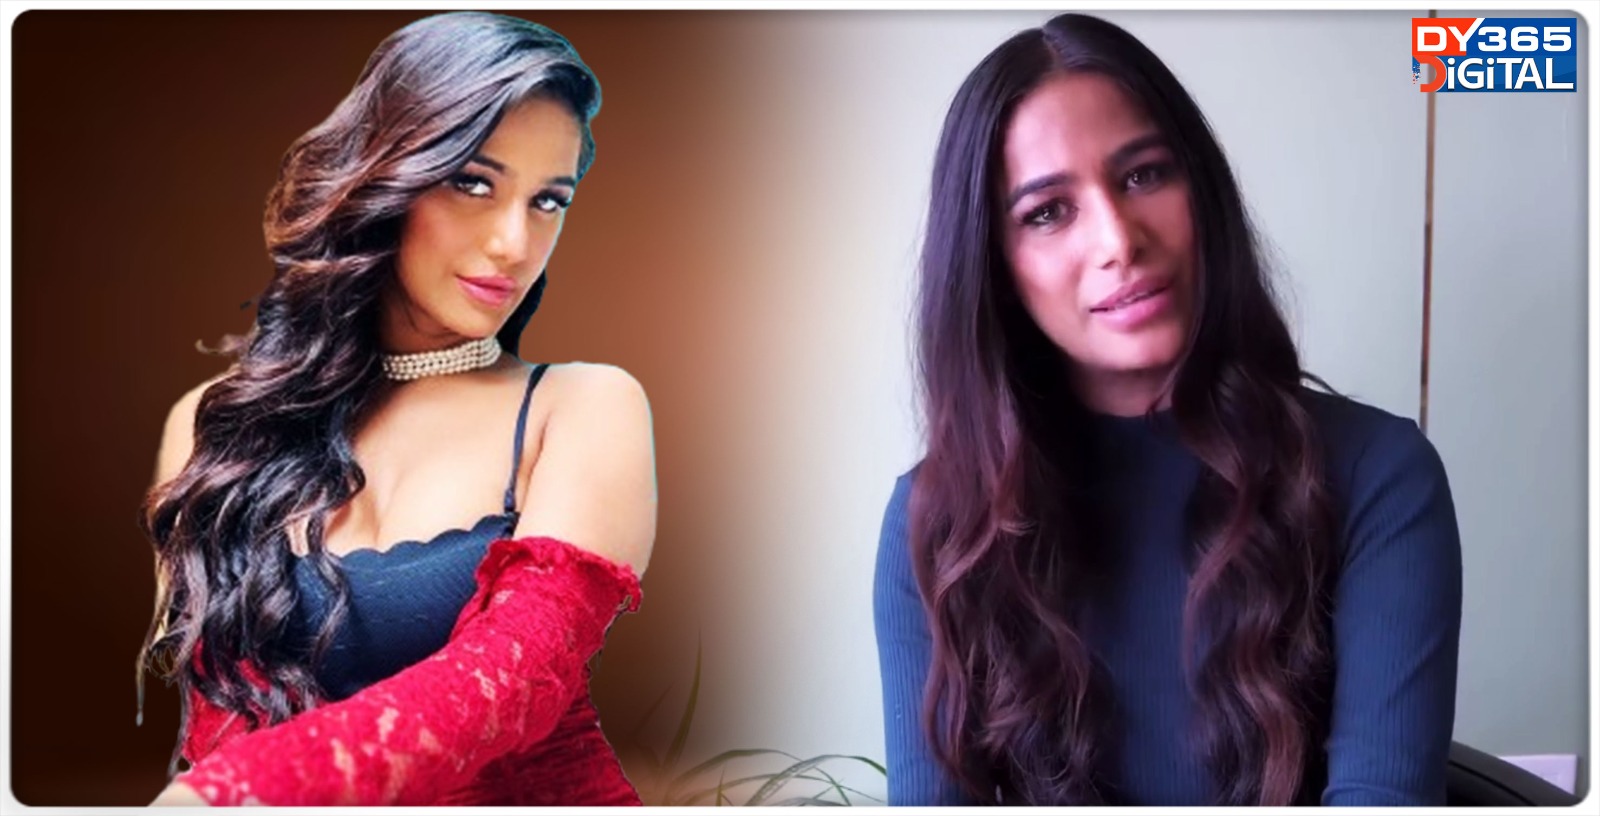 Model Poonam Pandey Clarifies She Is Alive, Shares A Video 